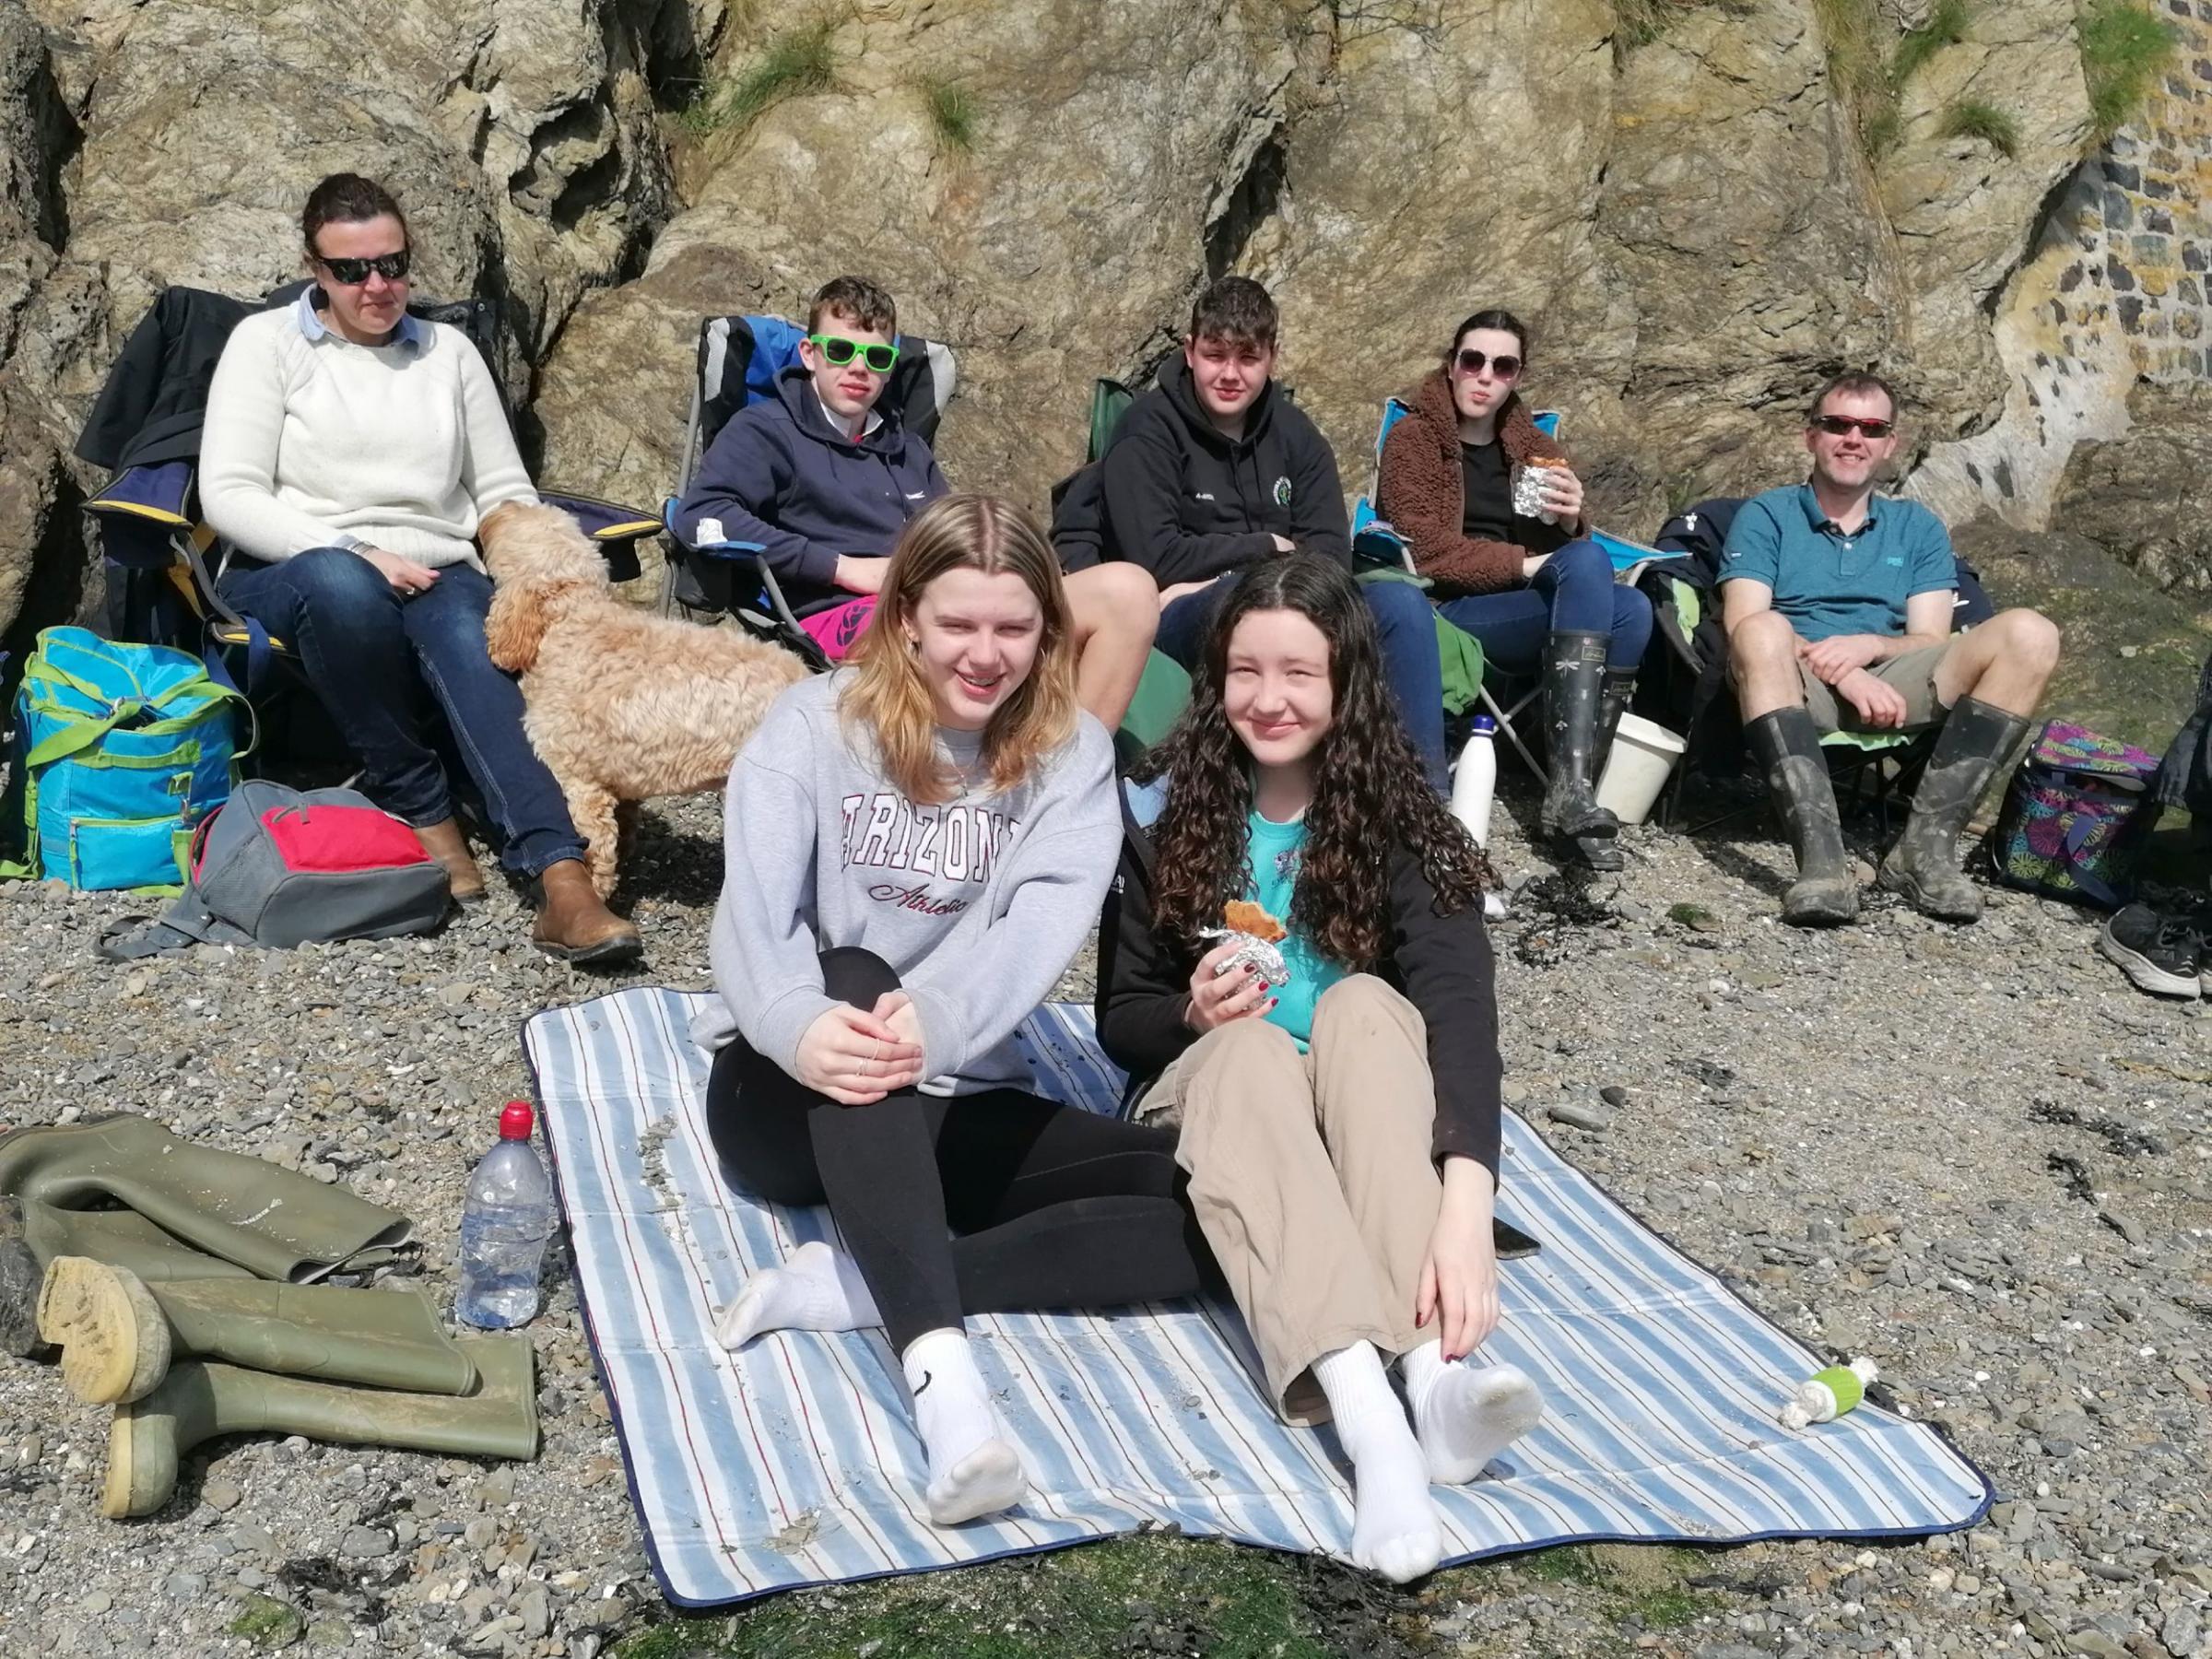 The Hosken and Hosking families joined for pasties on the beach